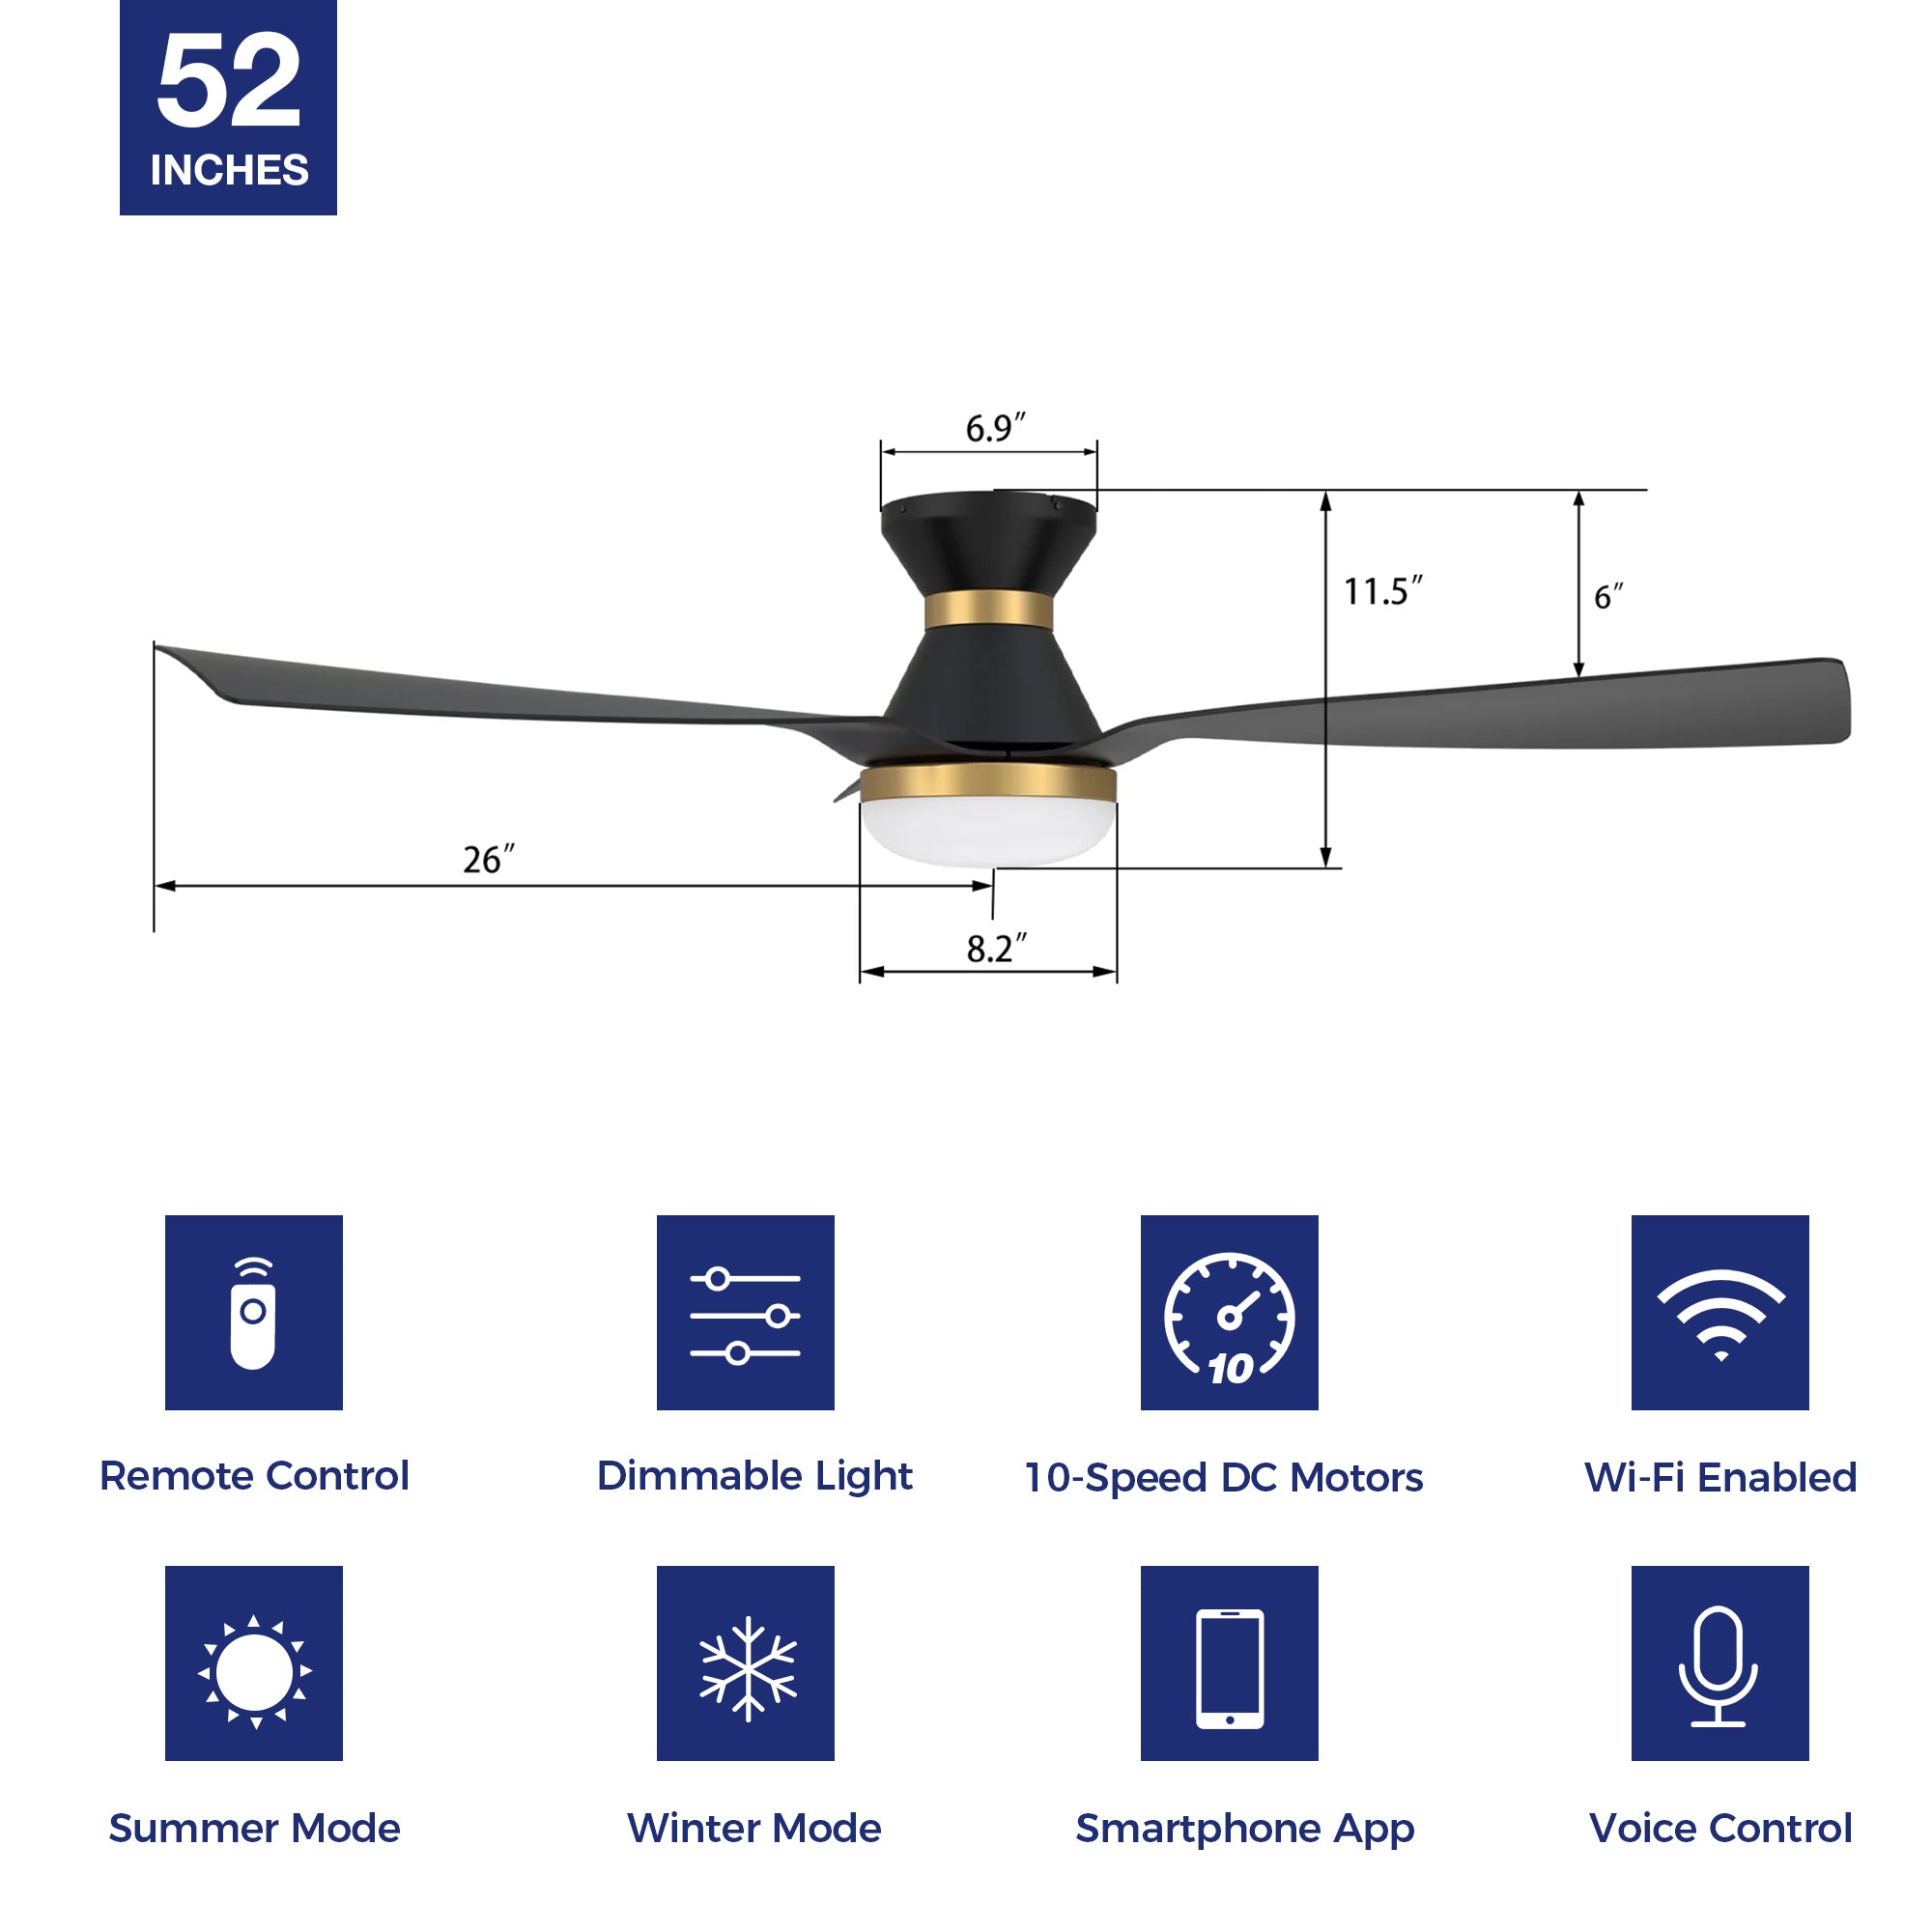 This Livex 52&#39;&#39; smart ceiling fan allows you to adjust different lights and fan speeds via full-control remote,smart WIFI apps,Google Assistant or Amazon Alexa.It is quiet a perfect pick to replace any existing DC ceiling fans in your home.